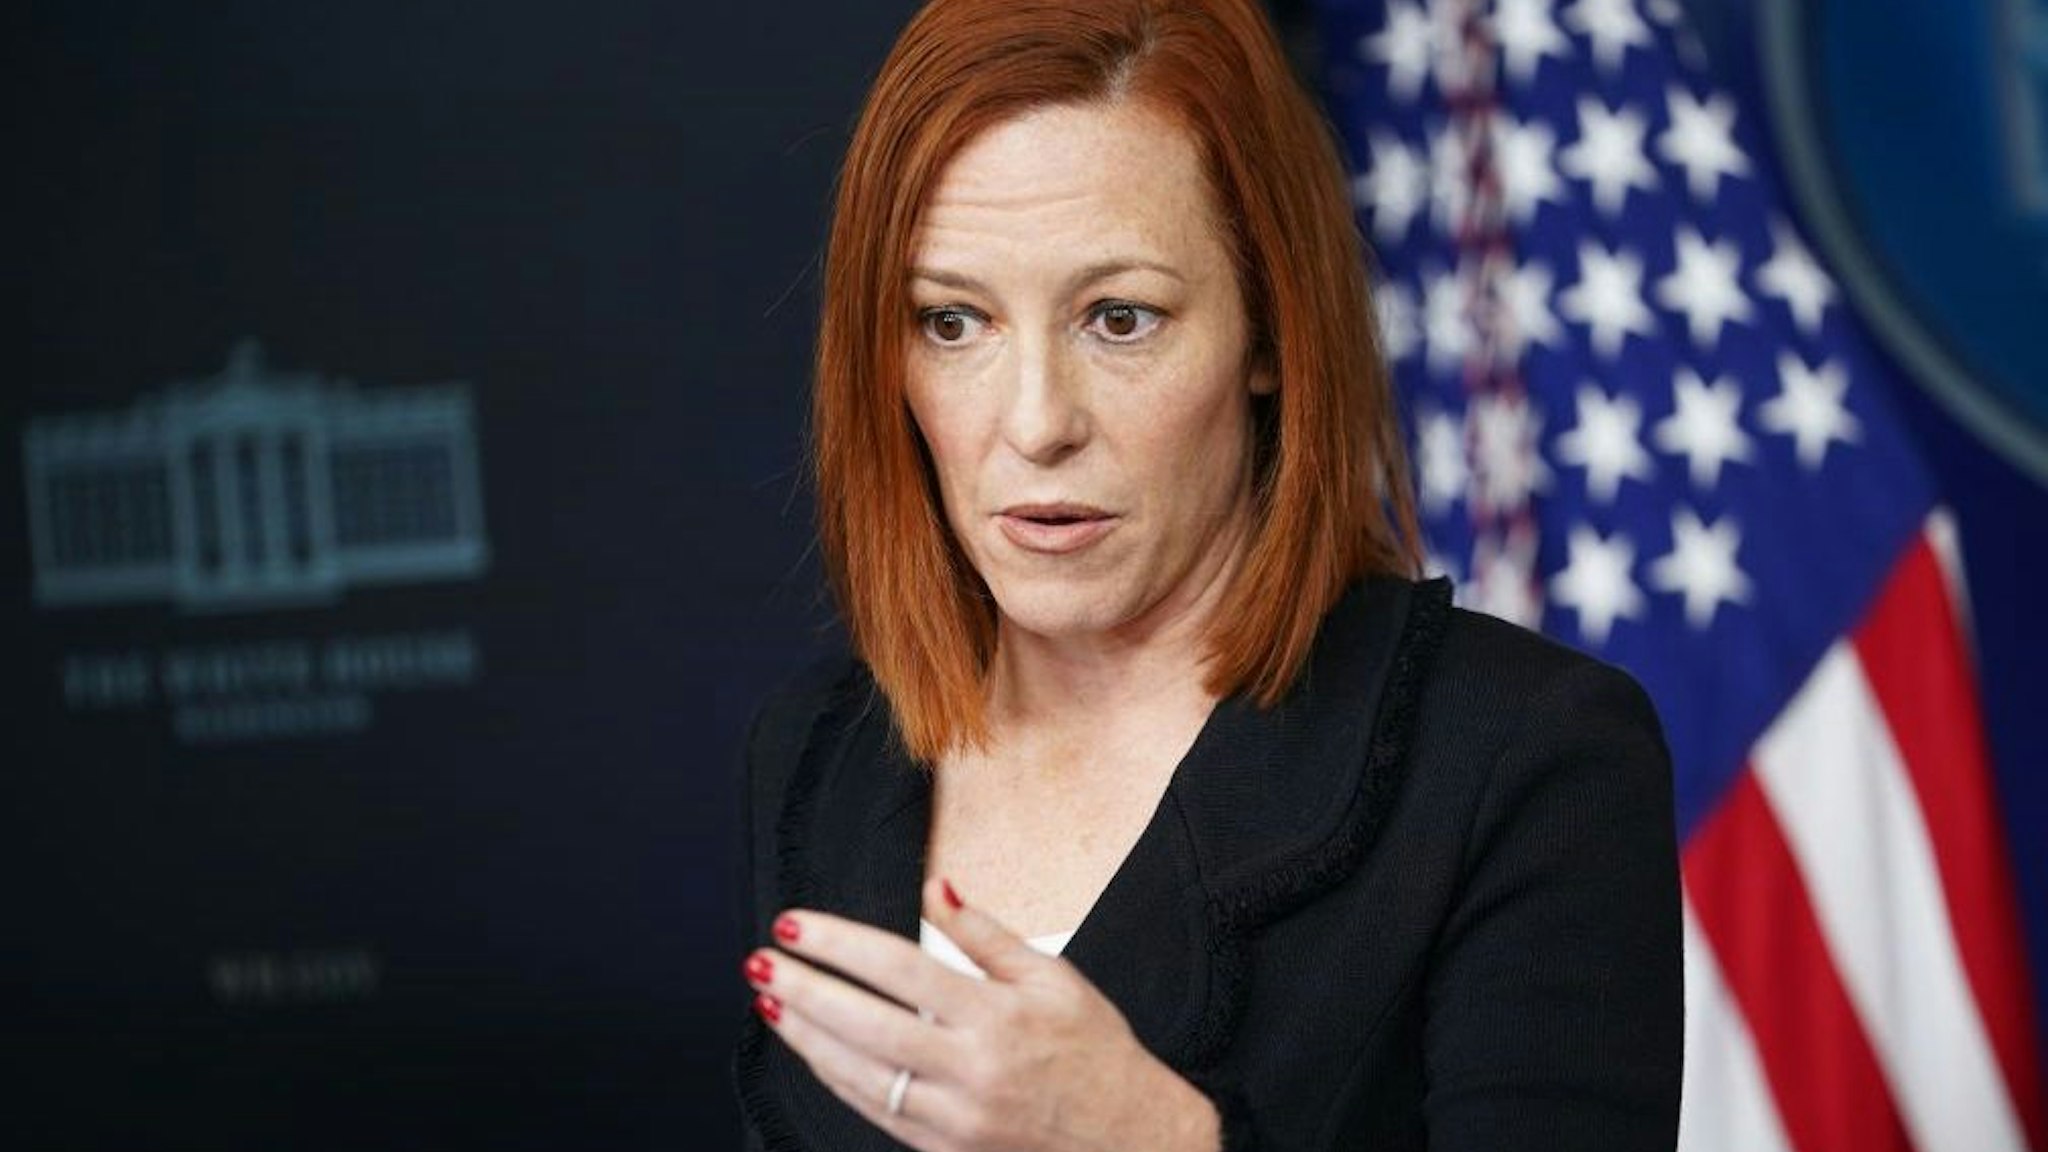 White House Press Secretary Jen Psaki speaks during the daily press briefing on March 5, 2021, in the Brady Briefing Room of the White House in Washington, DC.